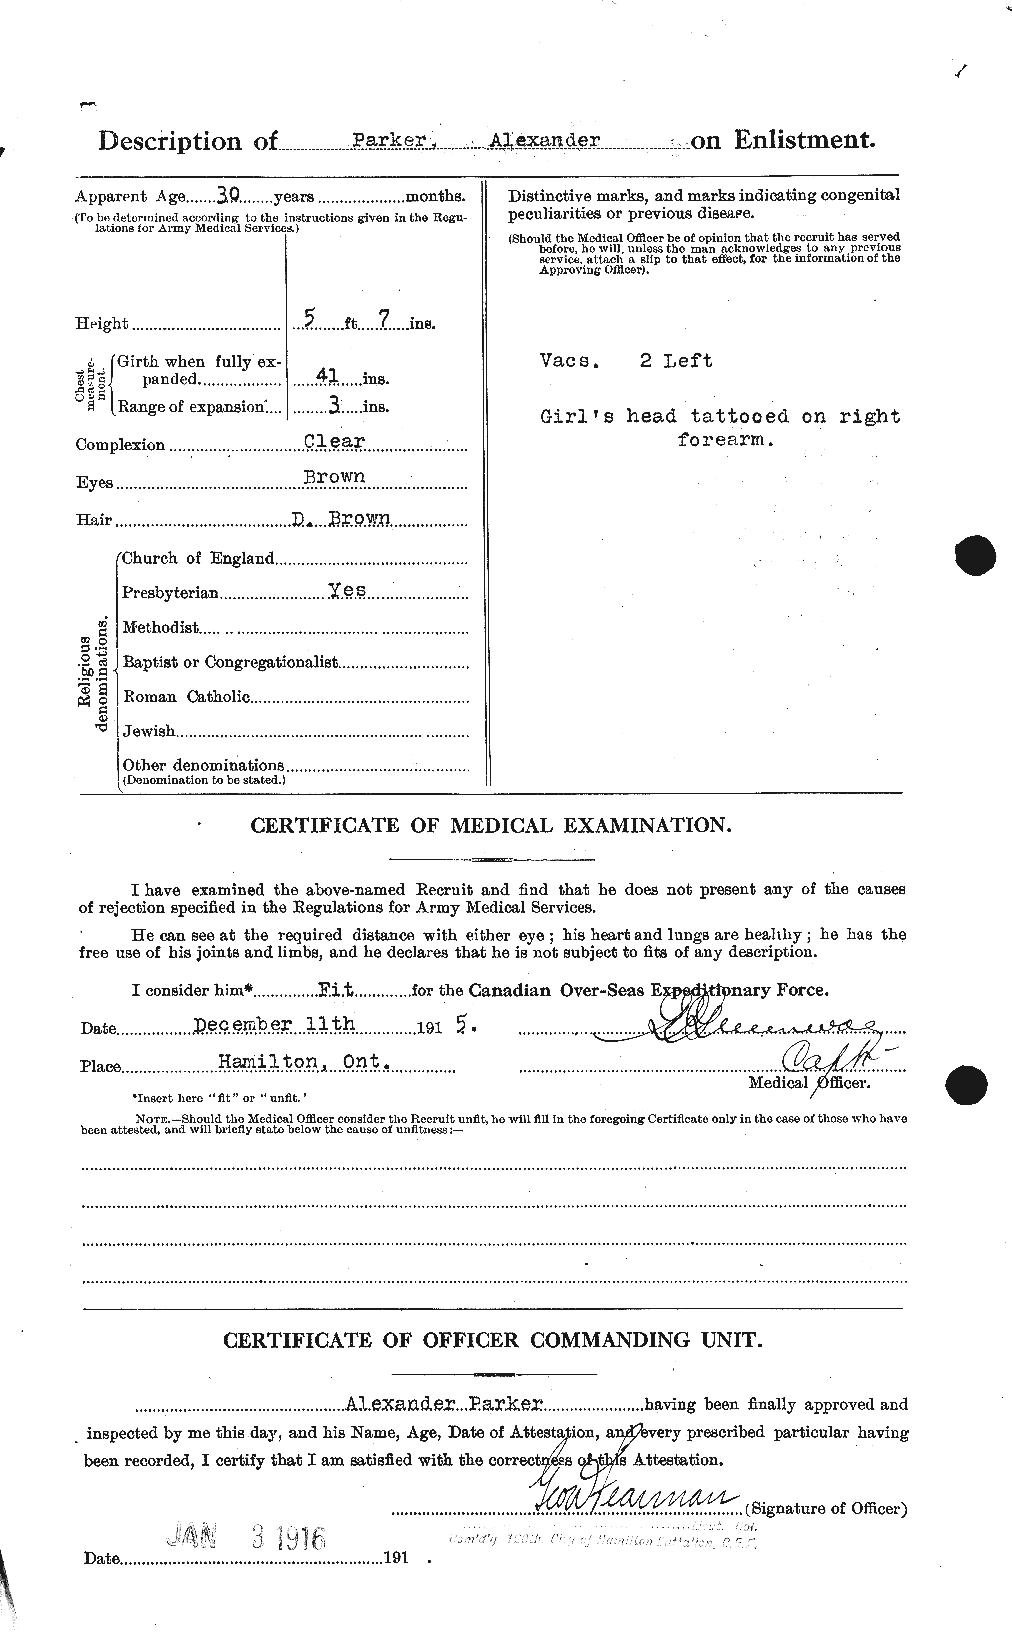 Personnel Records of the First World War - CEF 564971b